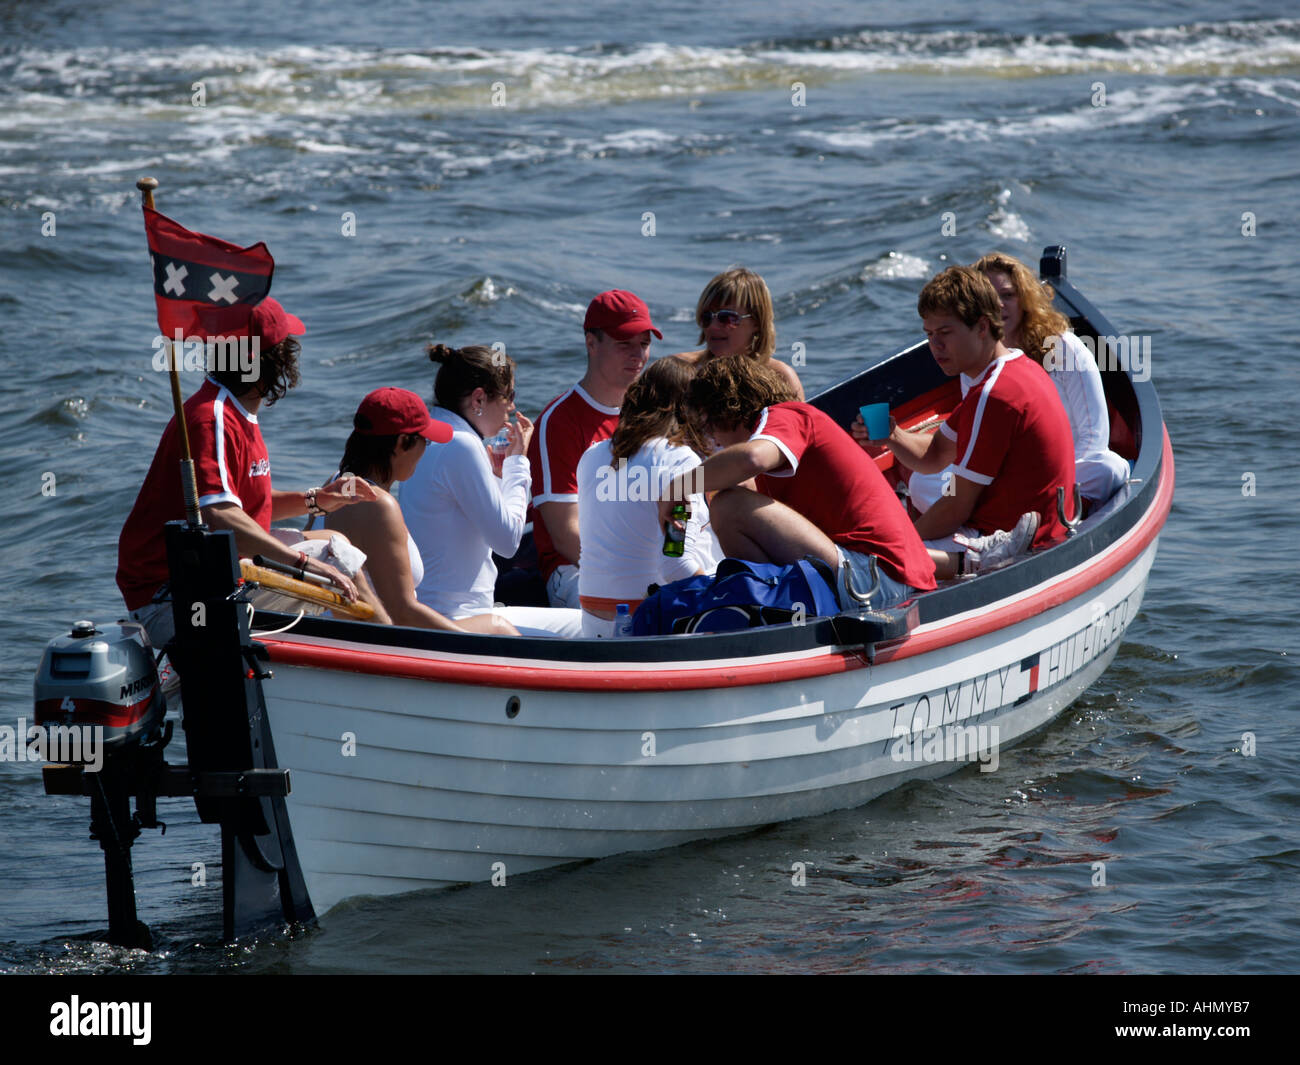 Tommy Hilfiger boat with Tommy Hilfiger people in it shot at the Sail  Amsterdam 2005 tall ship event the Netherlands Stock Photo - Alamy